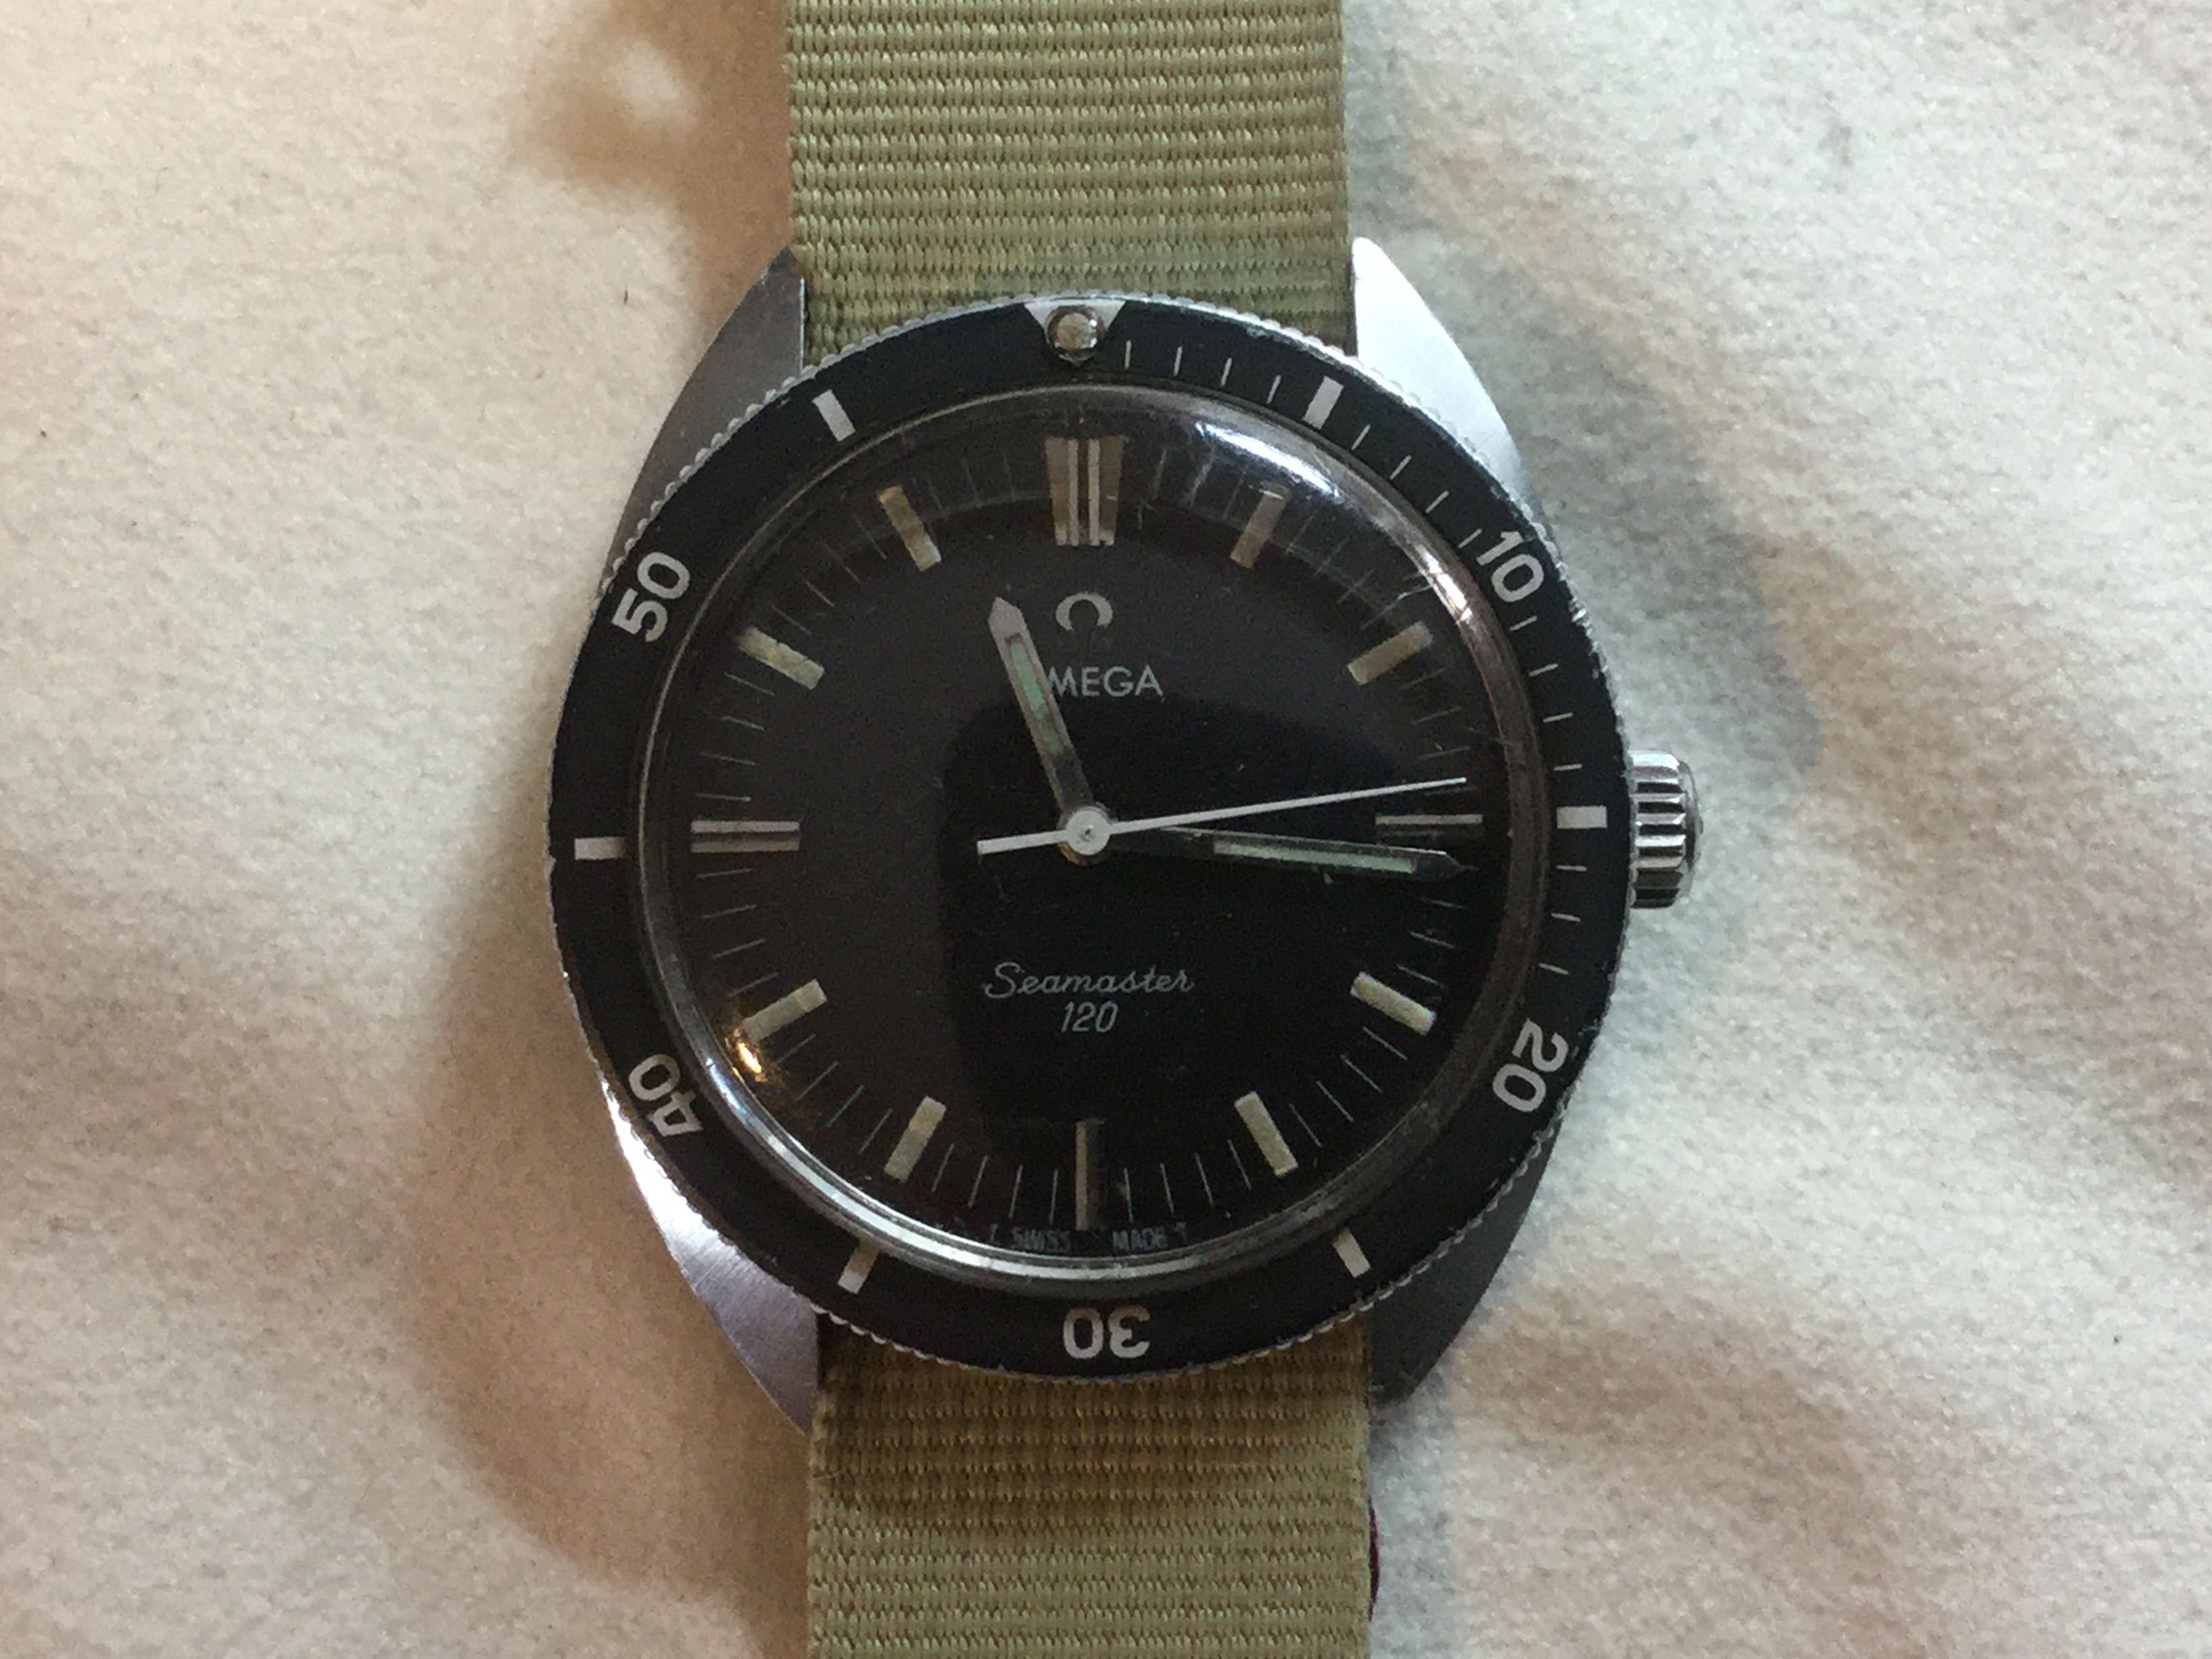 omega seamaster 120 review